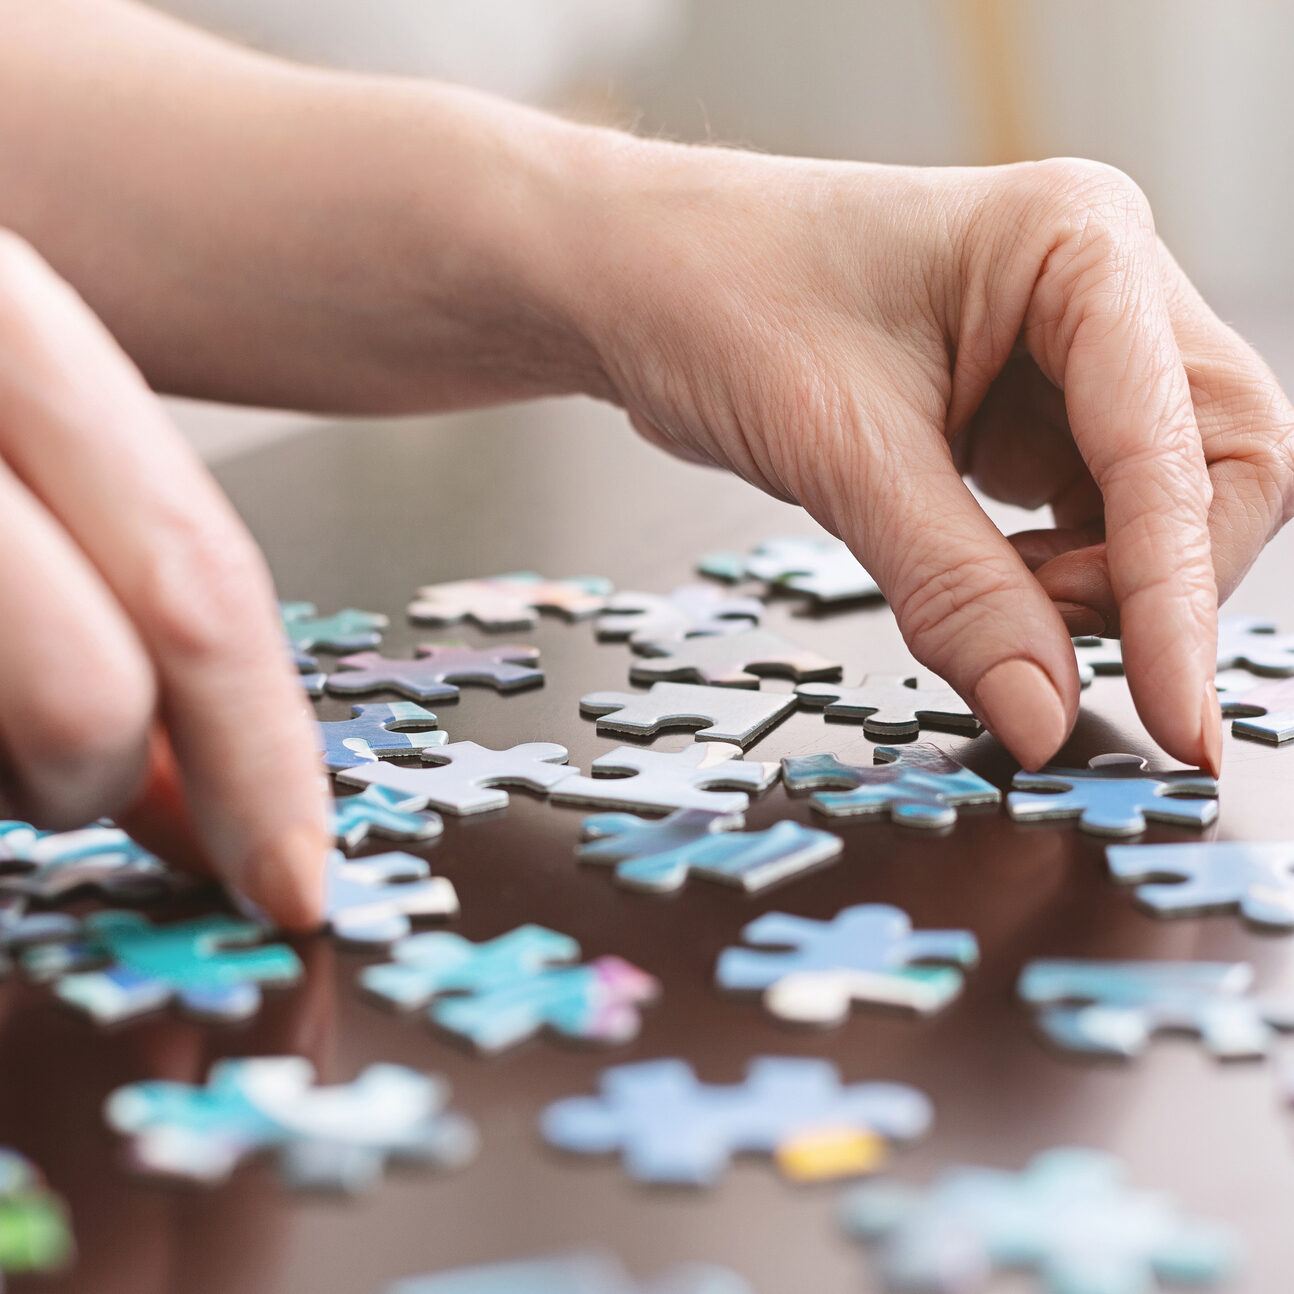 Dementia prevention. Elderly woman hands doing jigsaw puzzle at home, panorama, close up